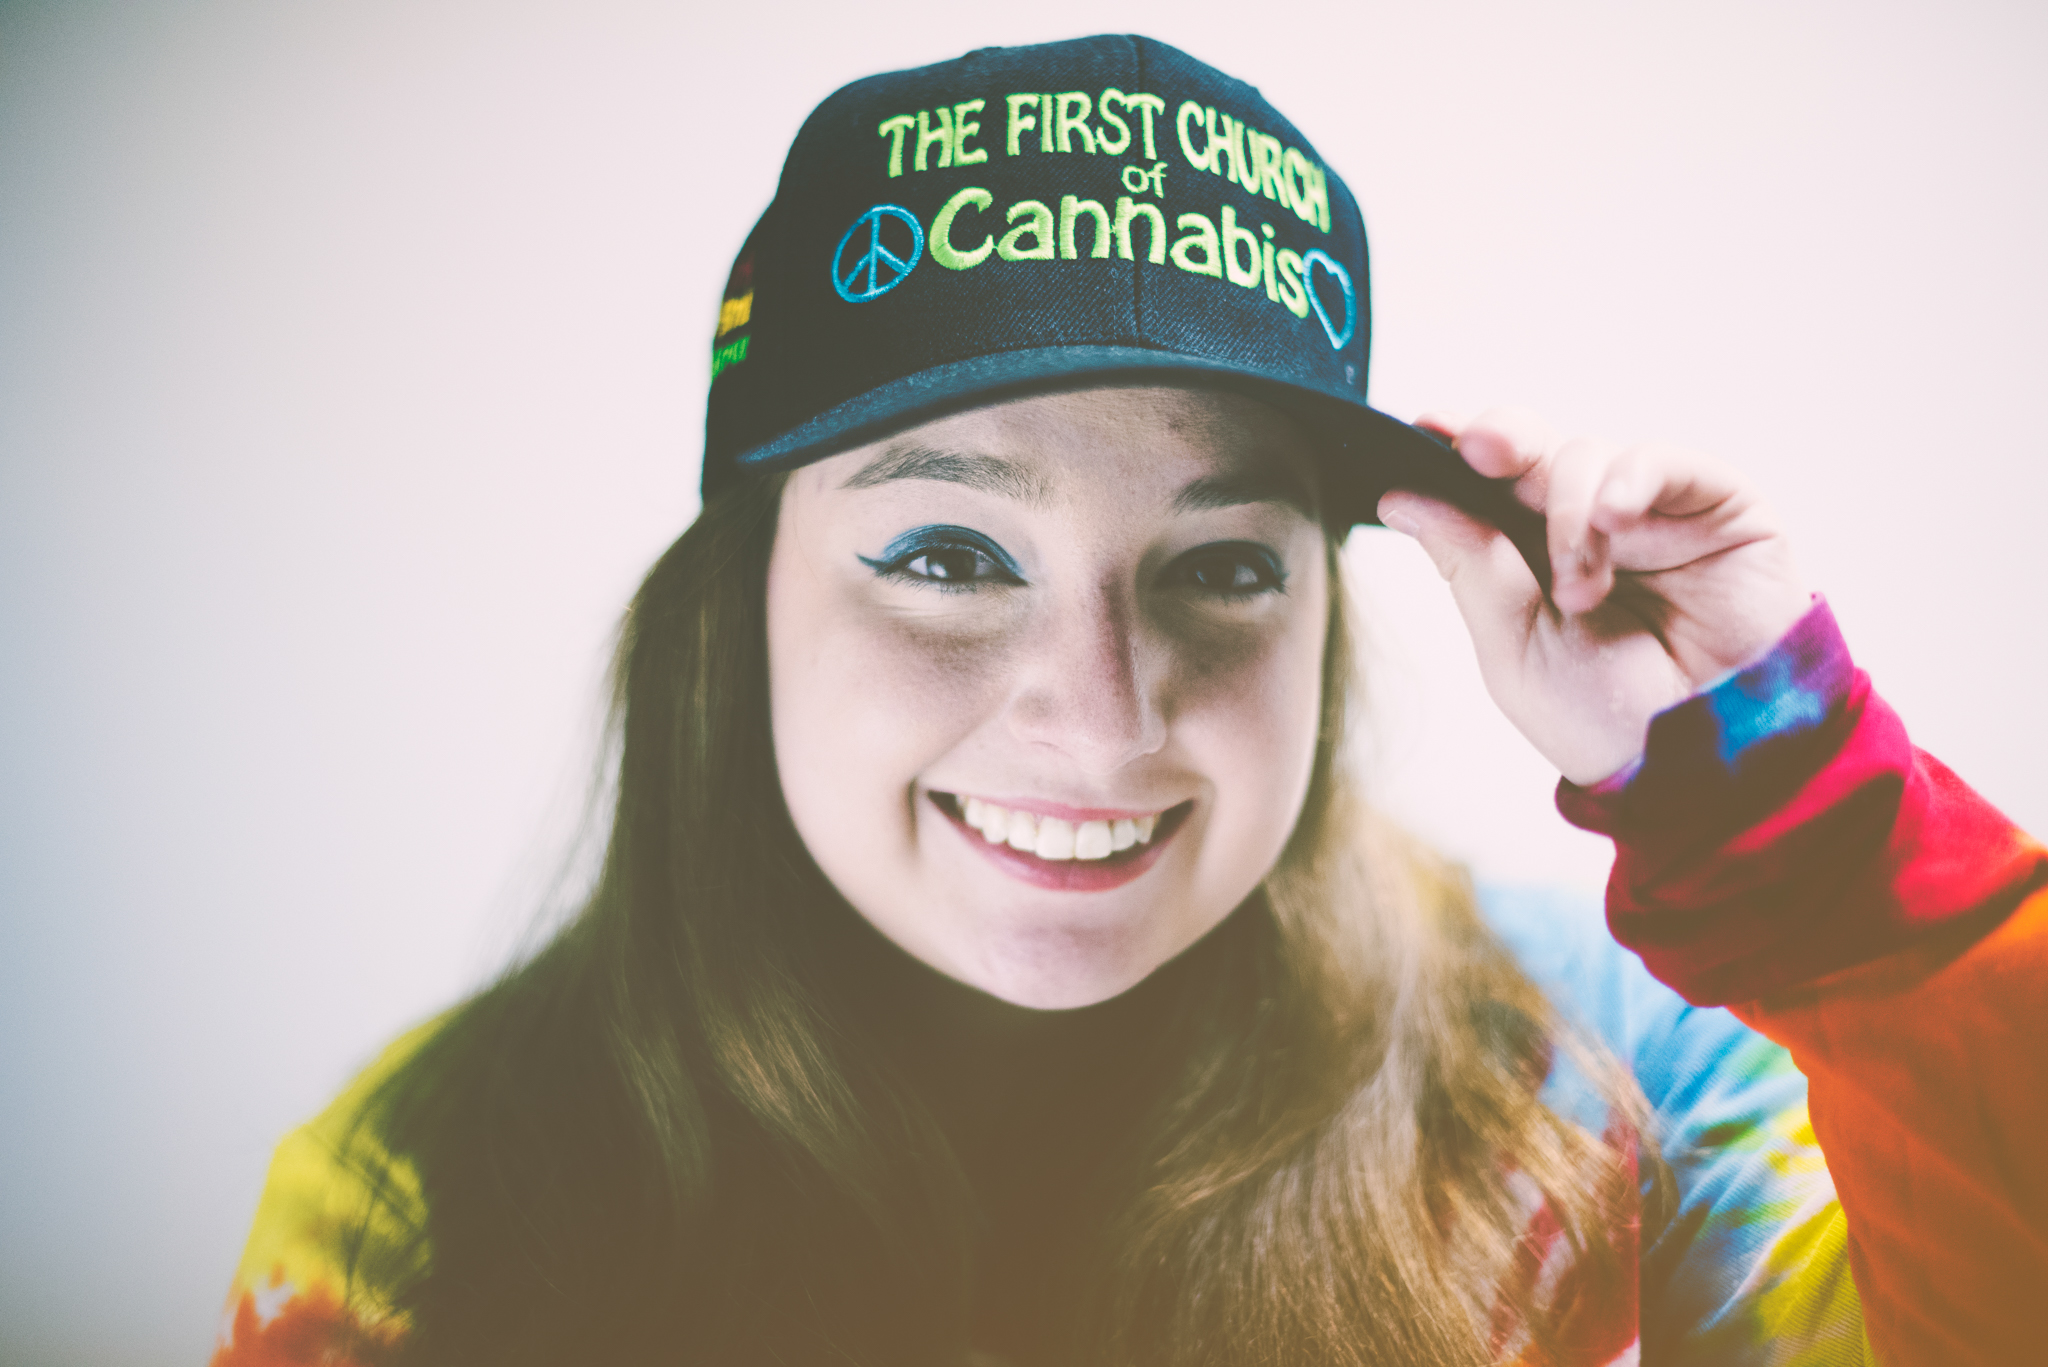 420 pics and memes - fashion accessory - The First Chure Cannabis